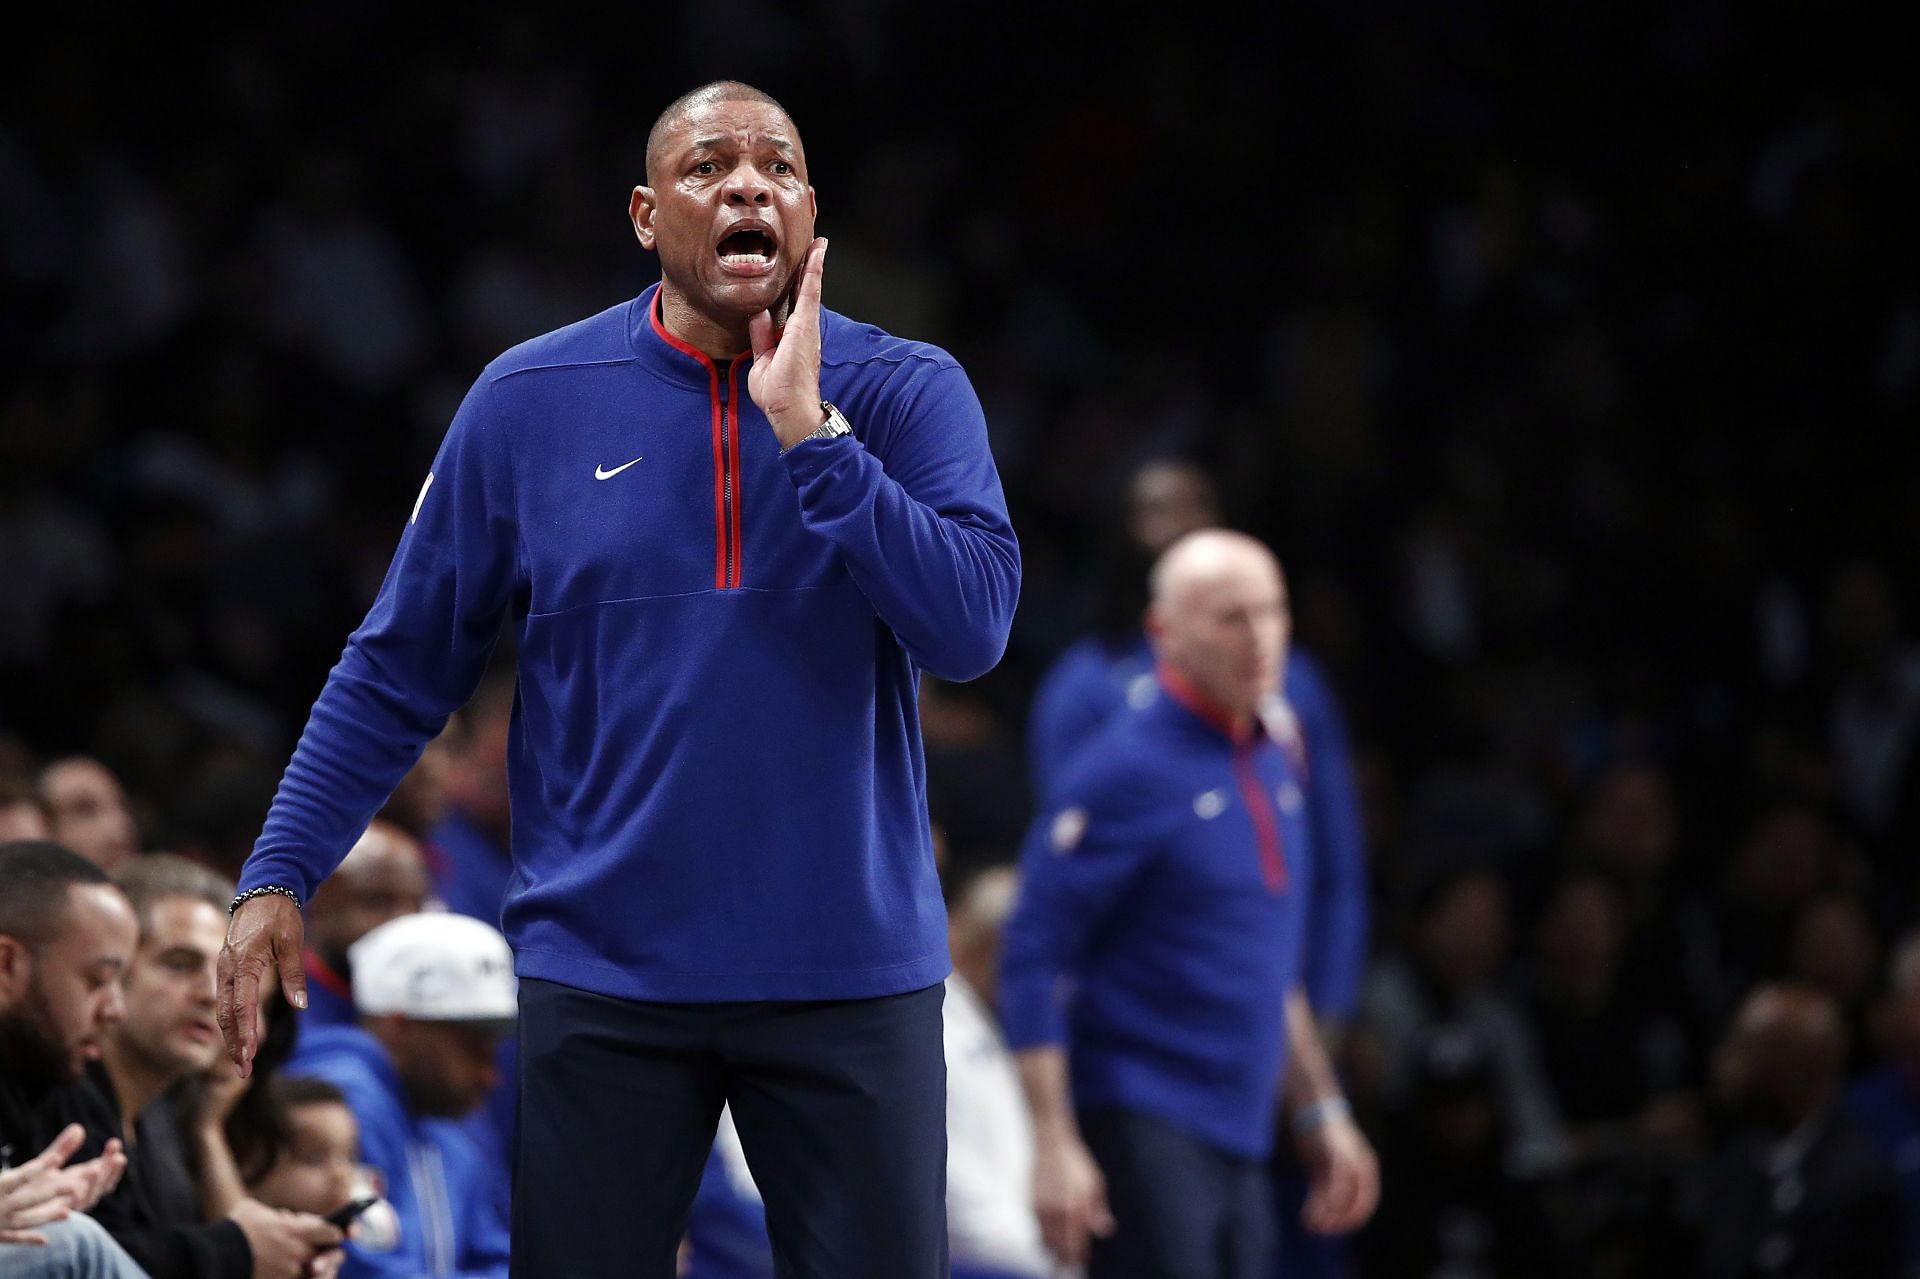 Doc Rivers has led the Philadelphia 76ers to a close Game 3 win against the Brooklyn Nets for a 3-0 lead.